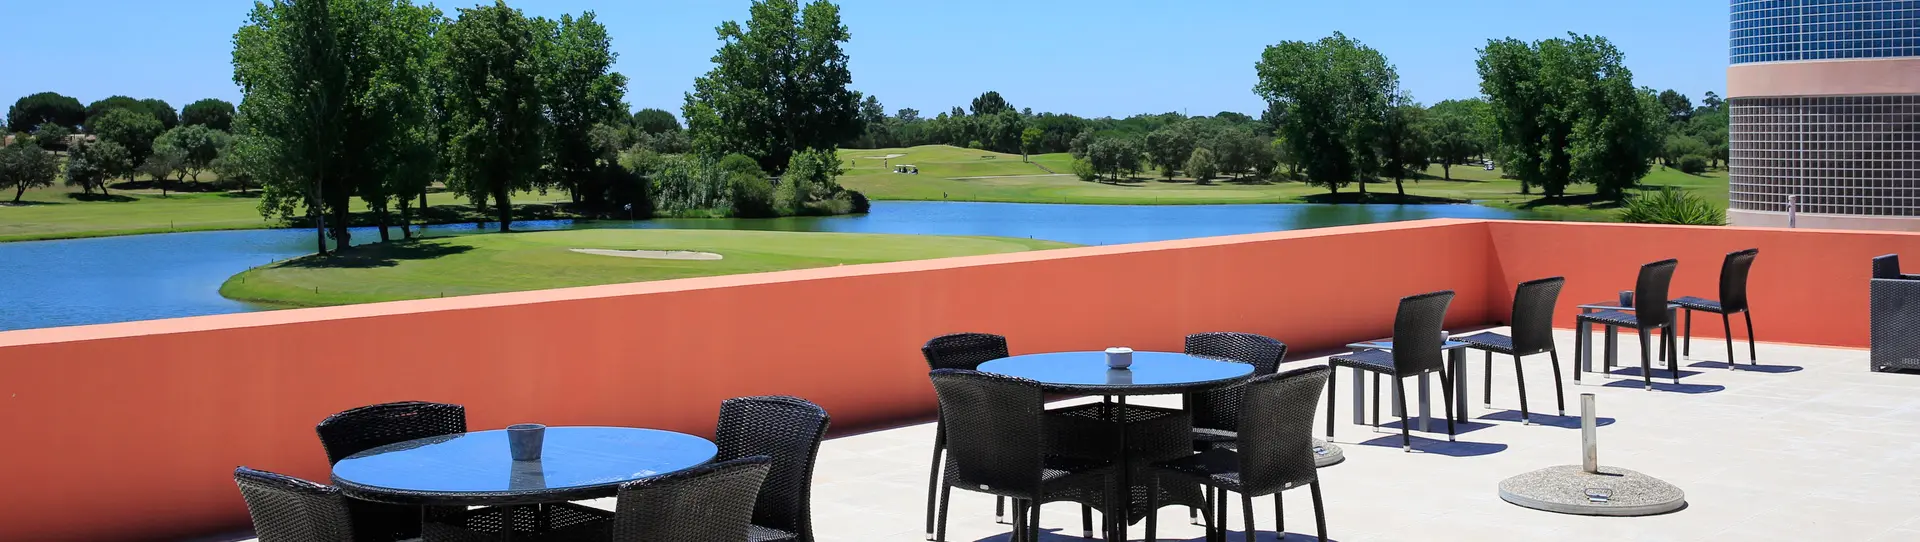 Portugal golf holidays - 7 Nights BB & 5 Golf Rounds - Photo 3